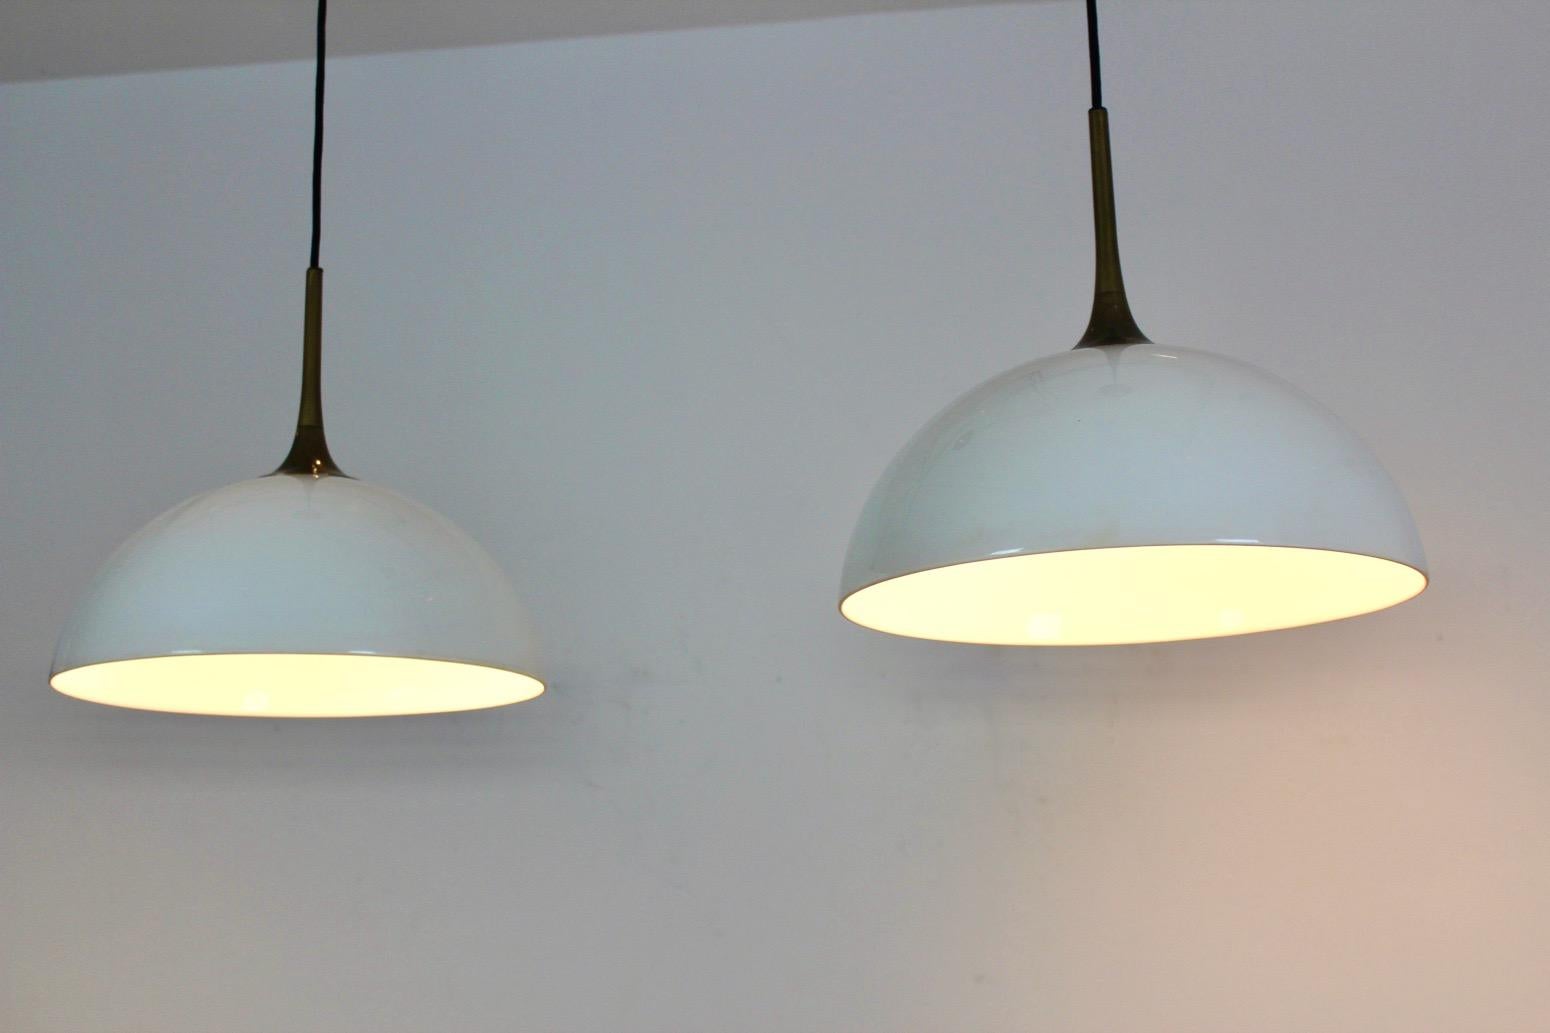 Elegant Pair of Brass and White-Opal Glass Pendant Lights by Florian Schulz For Sale 4